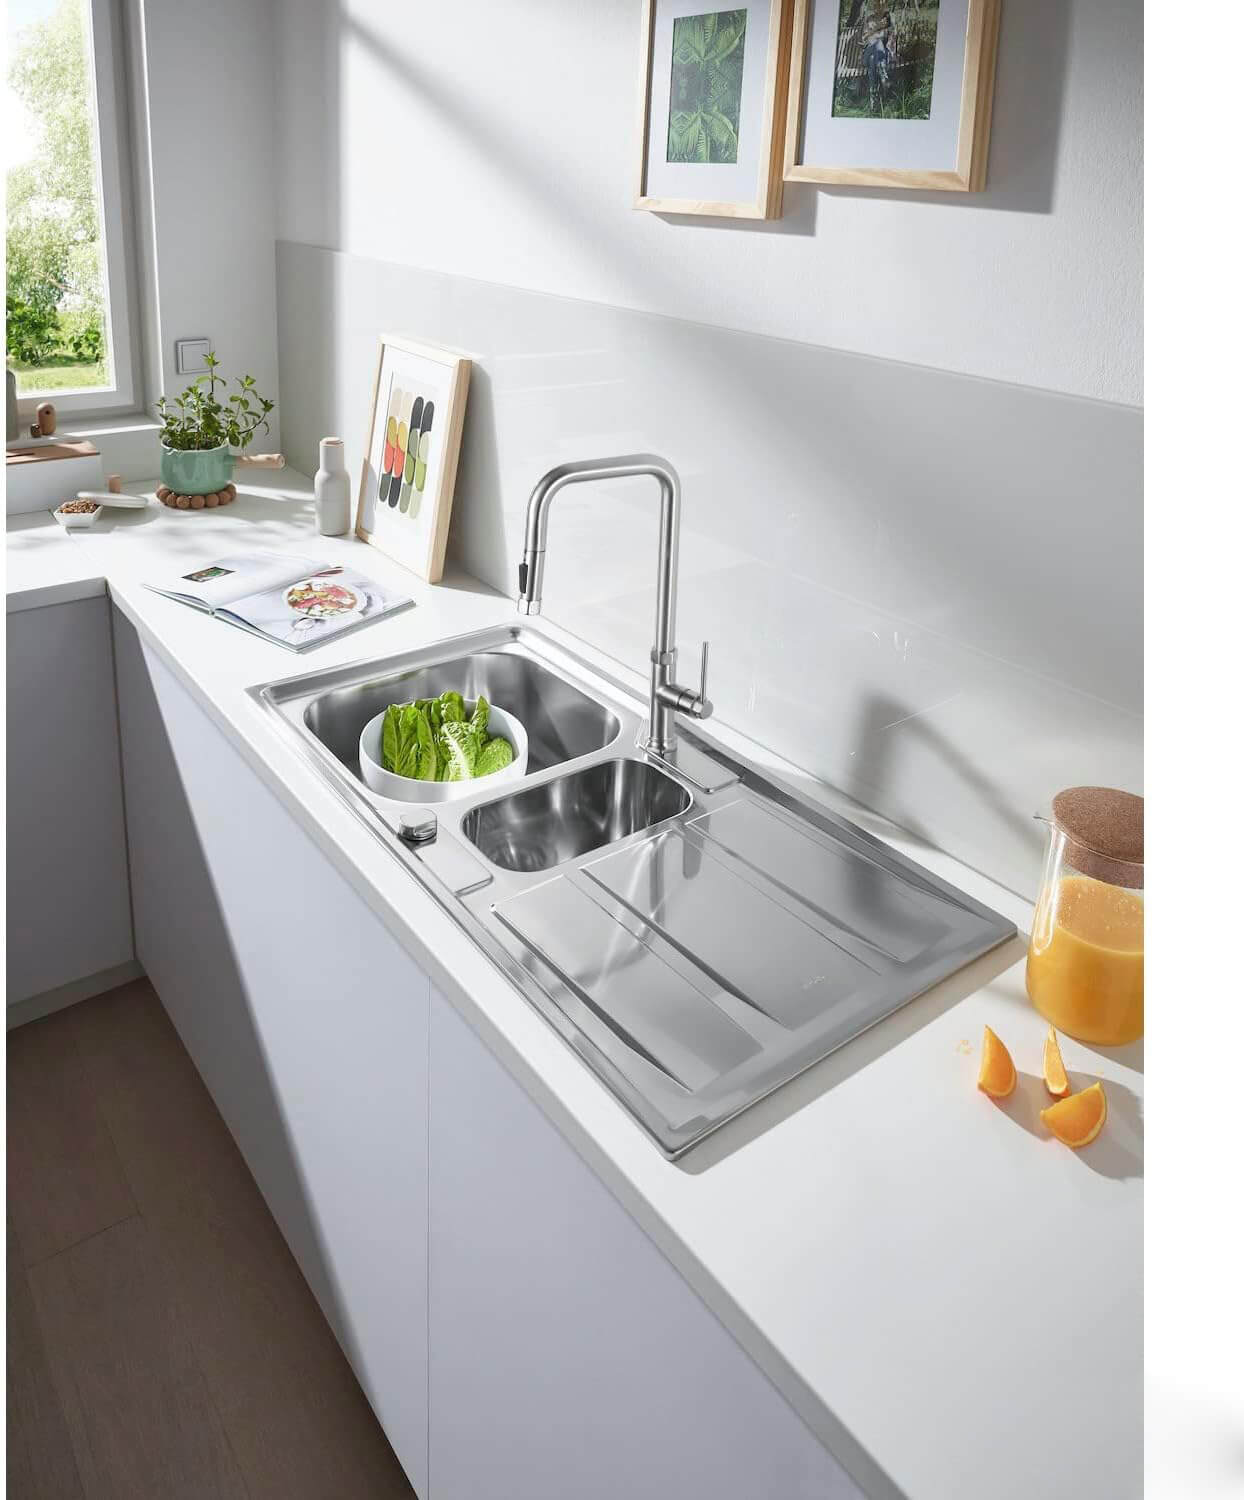 wowow dual function brushed nickel kitchen sink faucet 16